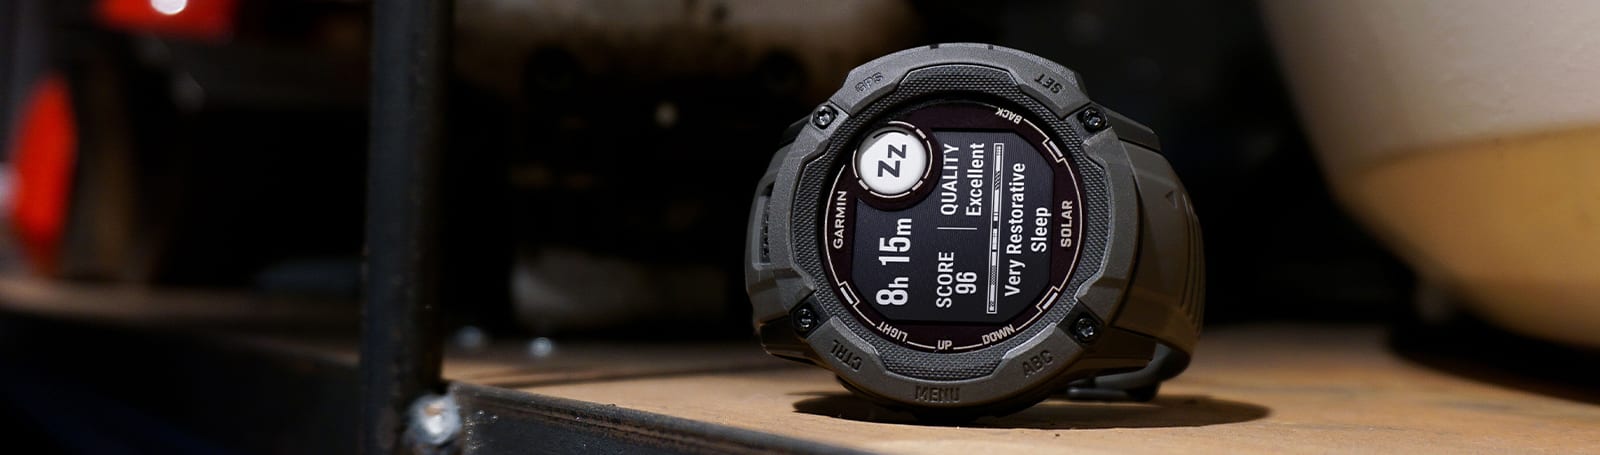 Garmin Instinct 2X Solar Smartwatch With Solar Charging Power Glass  Launched: Price, Features